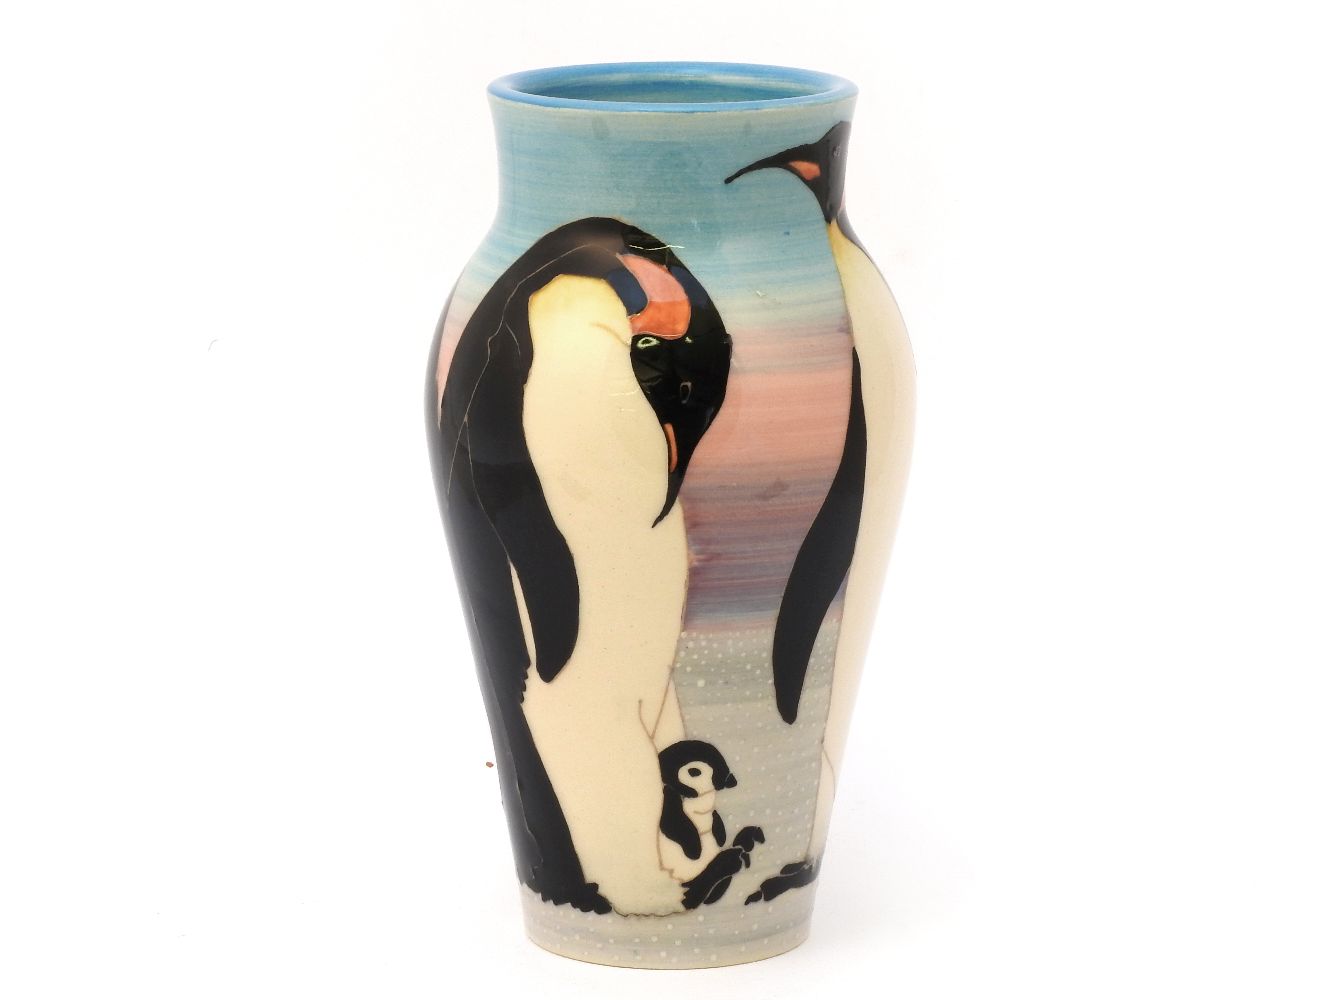 A Dennis Chinaworks pottery Emperor Penguin vase, designed by Sally Tuffin, no 268, 2004, 21cm high - Image 2 of 3